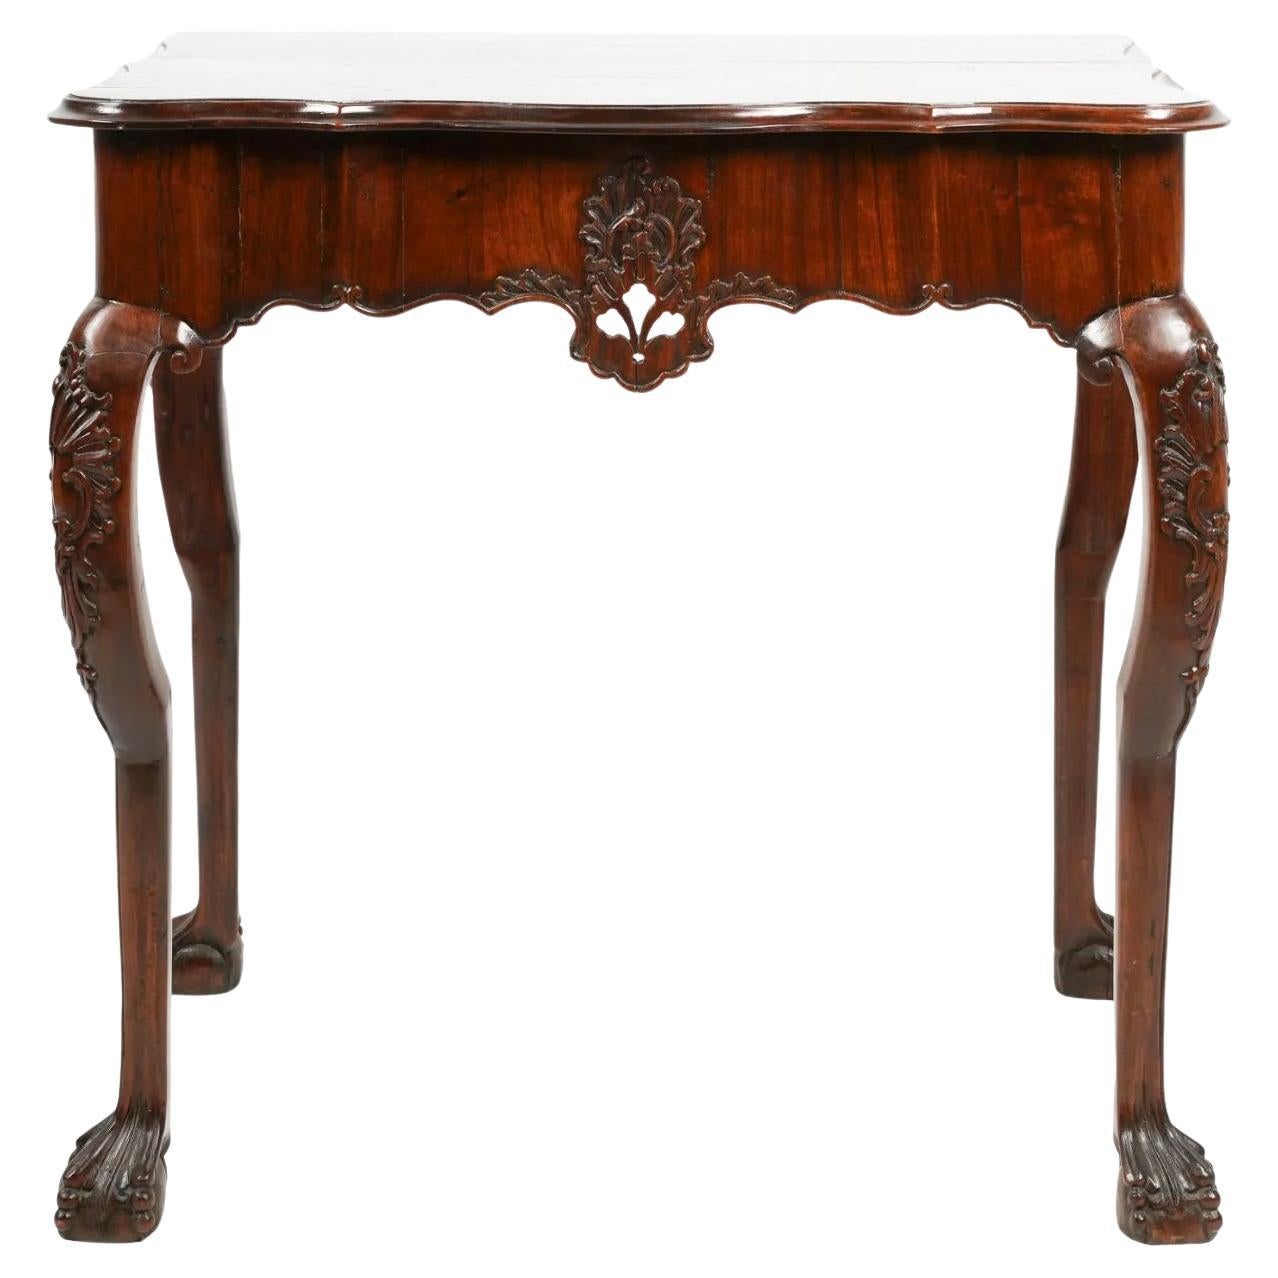 18th century Portuguese Rococo Console made of Brazilian Rosewood. The eared serpentine top above a shaped frieze carved all around with scrolling and cartouche decoration. Standing on big handsome carved ball and claw feet. With a deep rich patina,